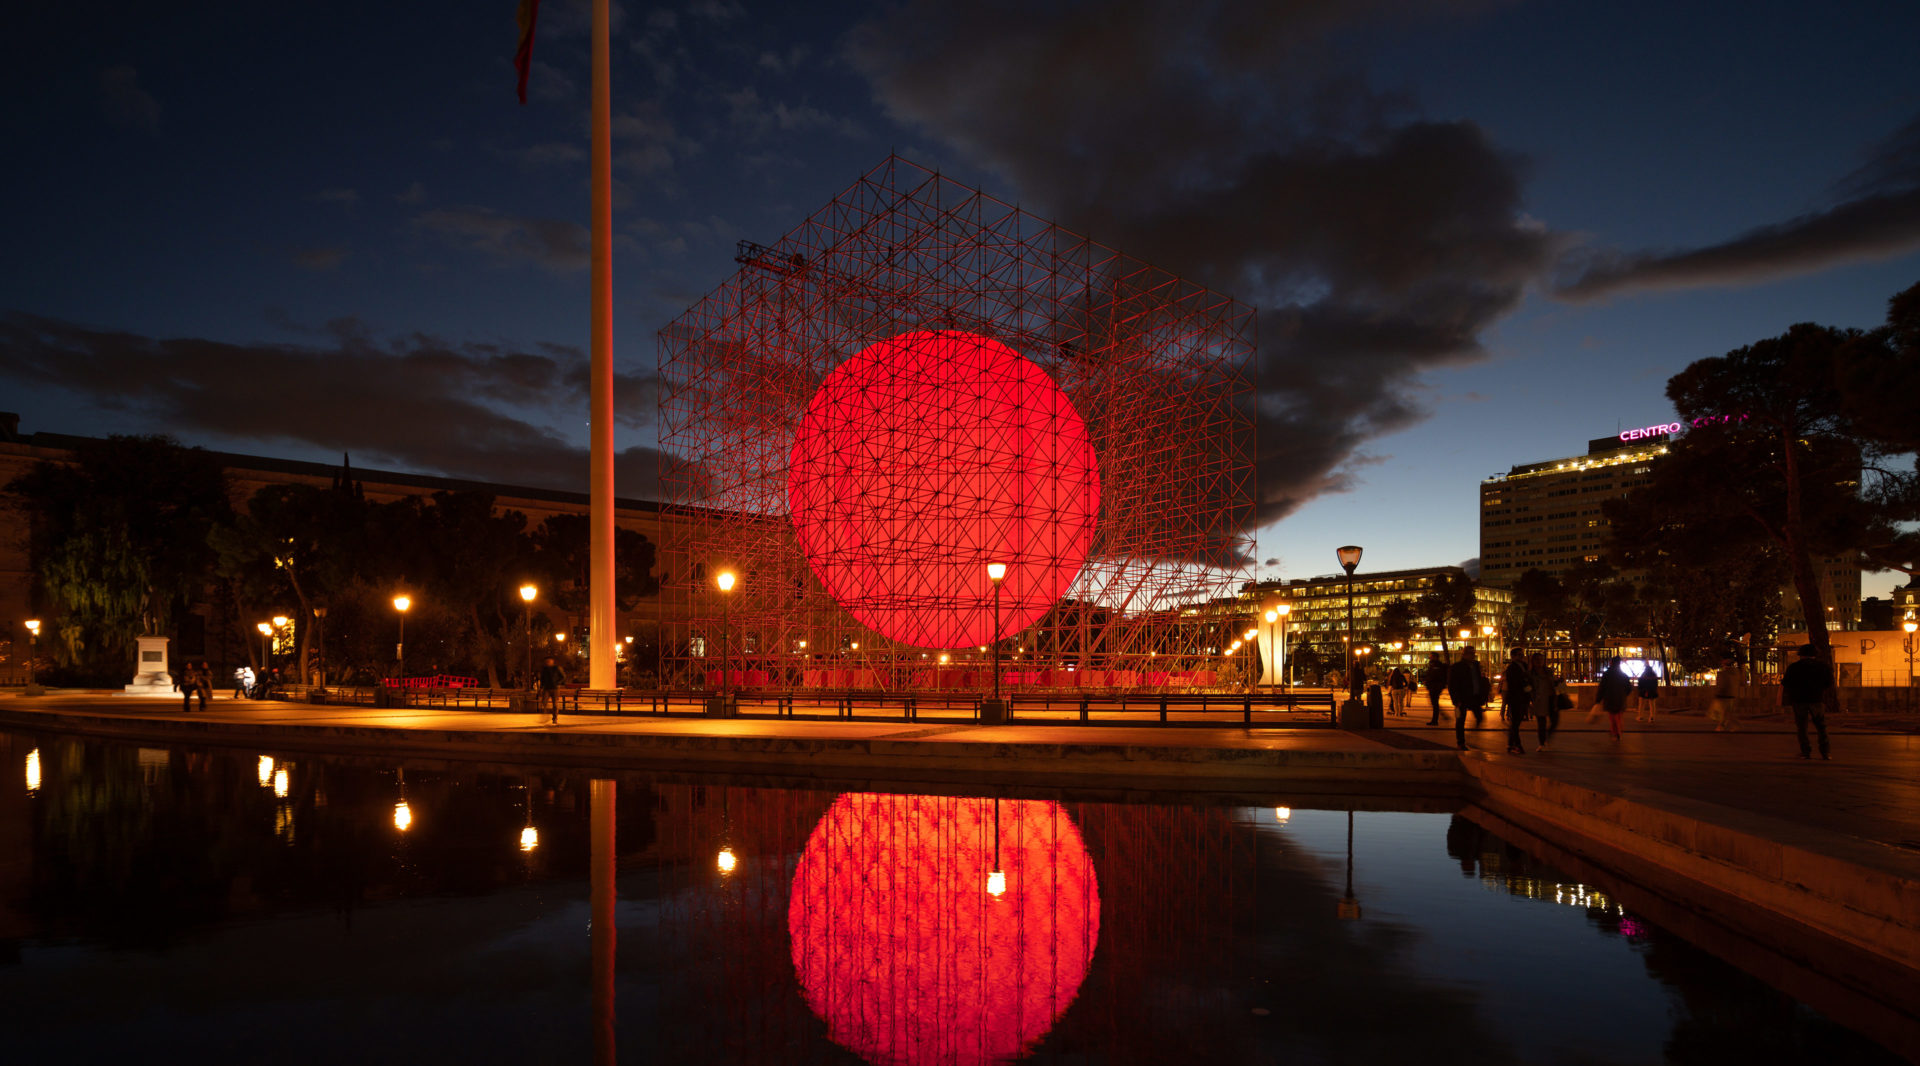 Tierra/Earth. A luminous red sphere caged inside a structure